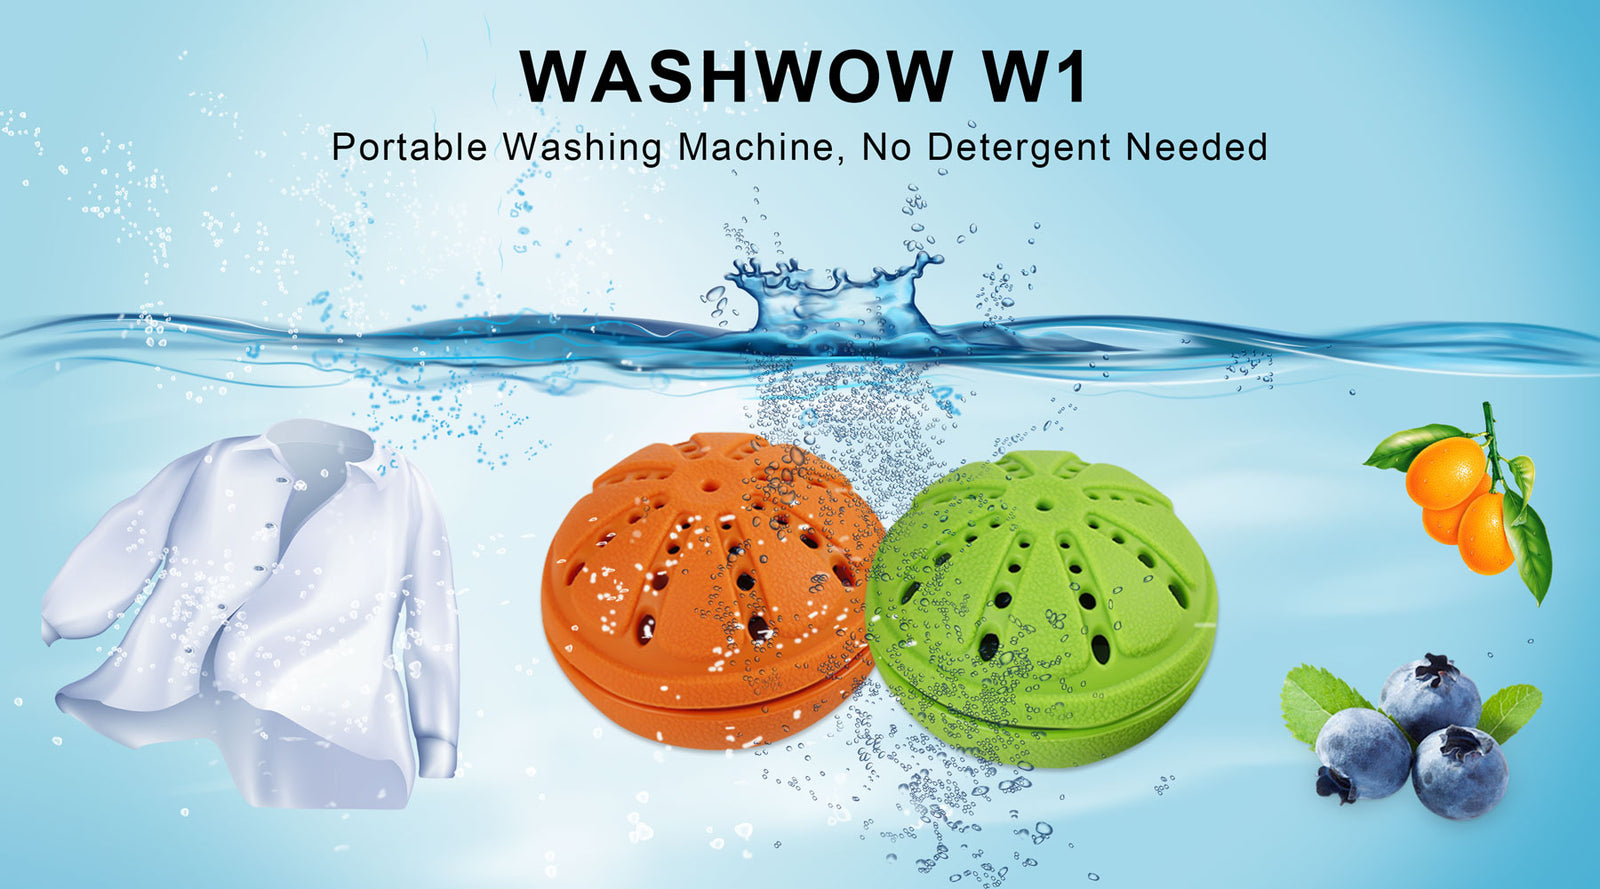 Does WASHWOW Laundry Ball Actually Work?